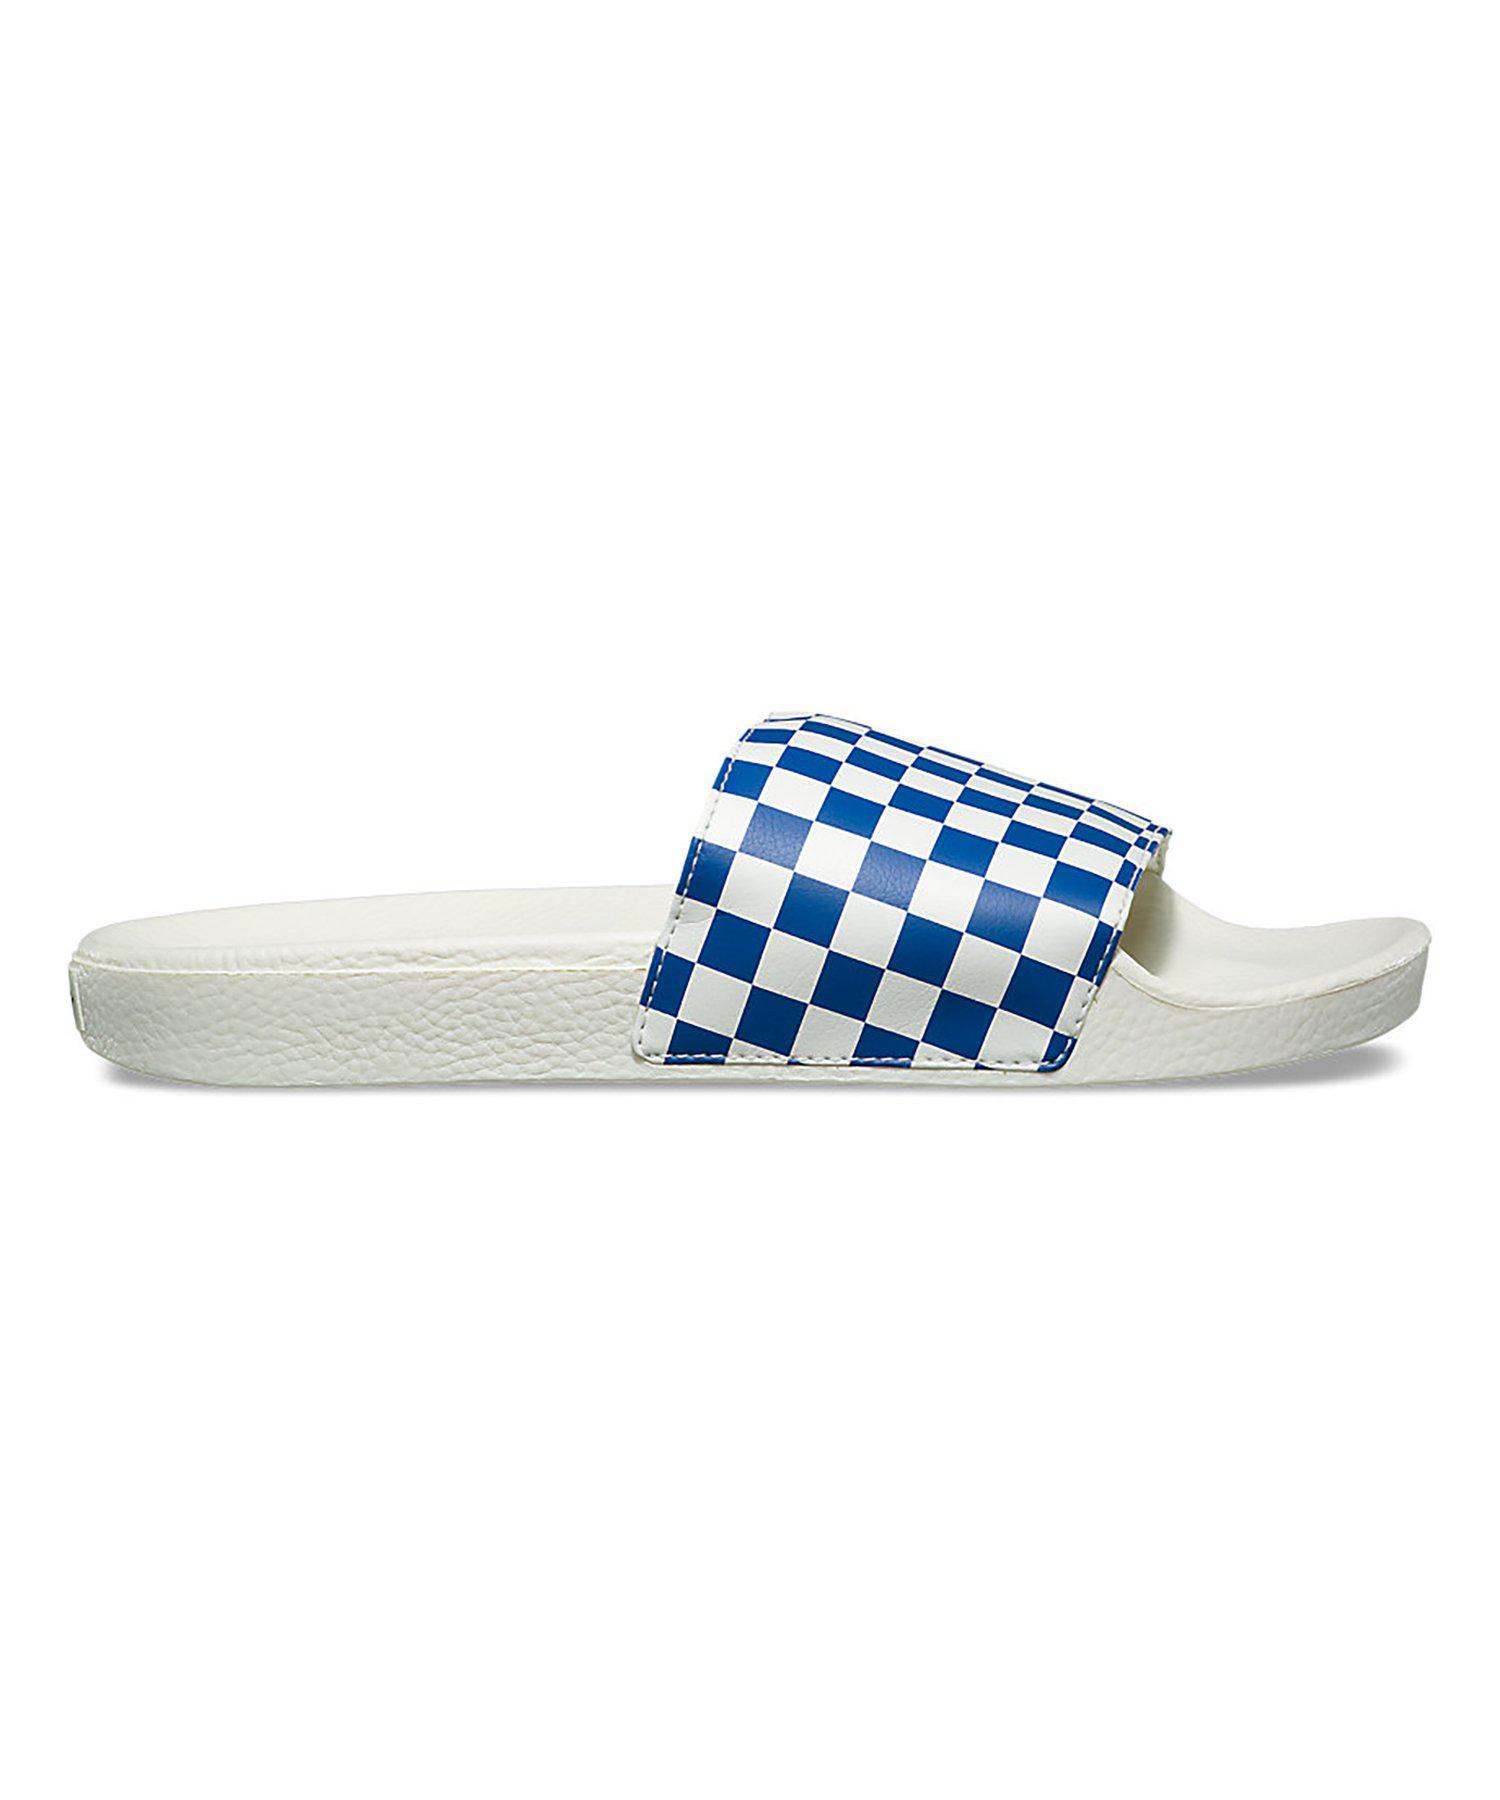 Vans Synthetic Checkerboard Slide-on 